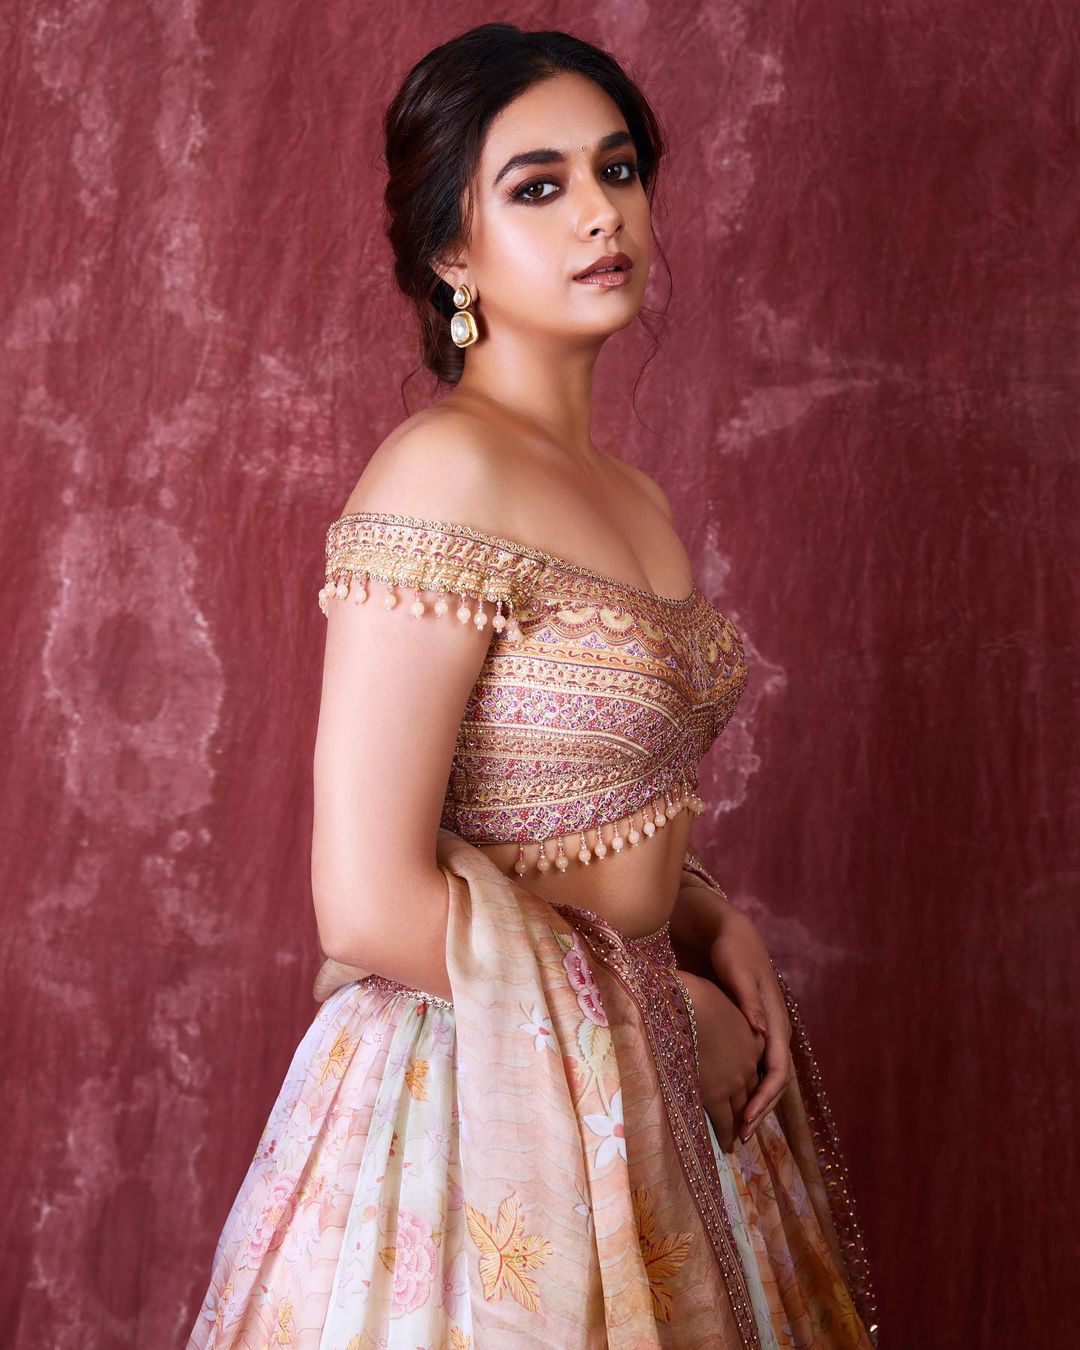 Pic Talk: Keerthy Suresh’s Hottest Pose Till Date